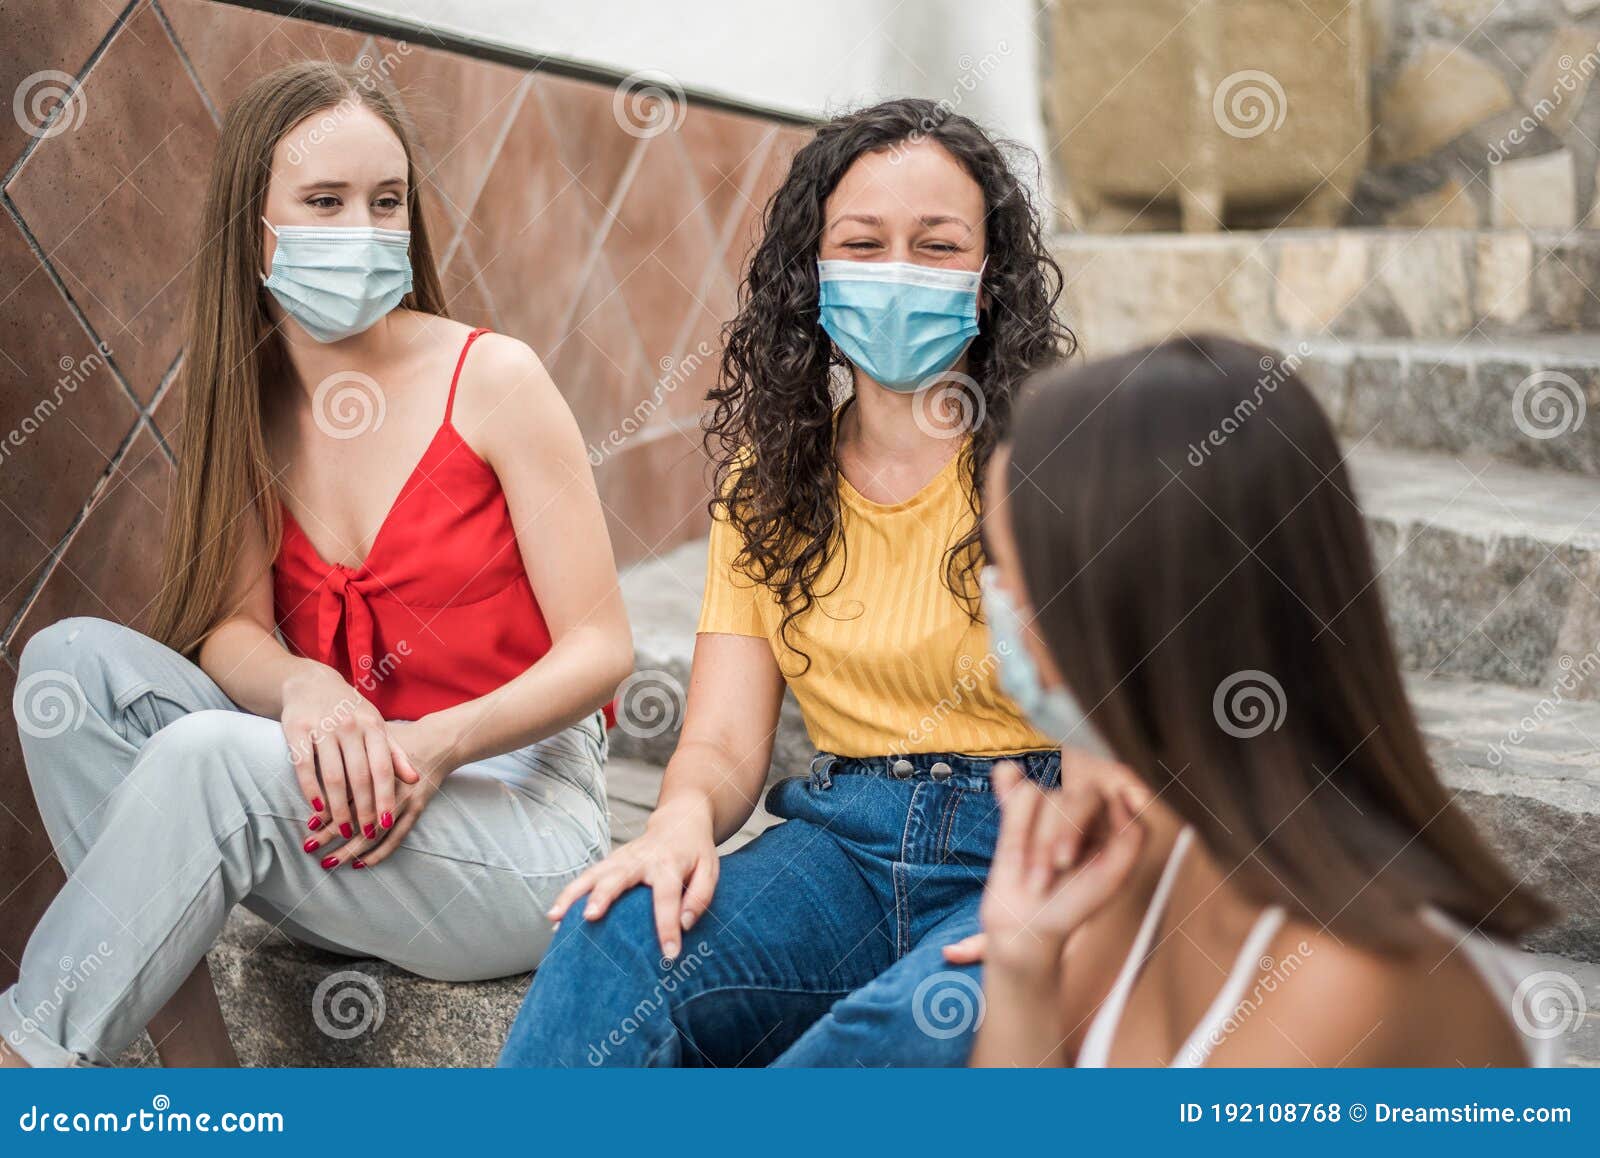 young women with face mask during summer vacation during covid-19. focus selectivo